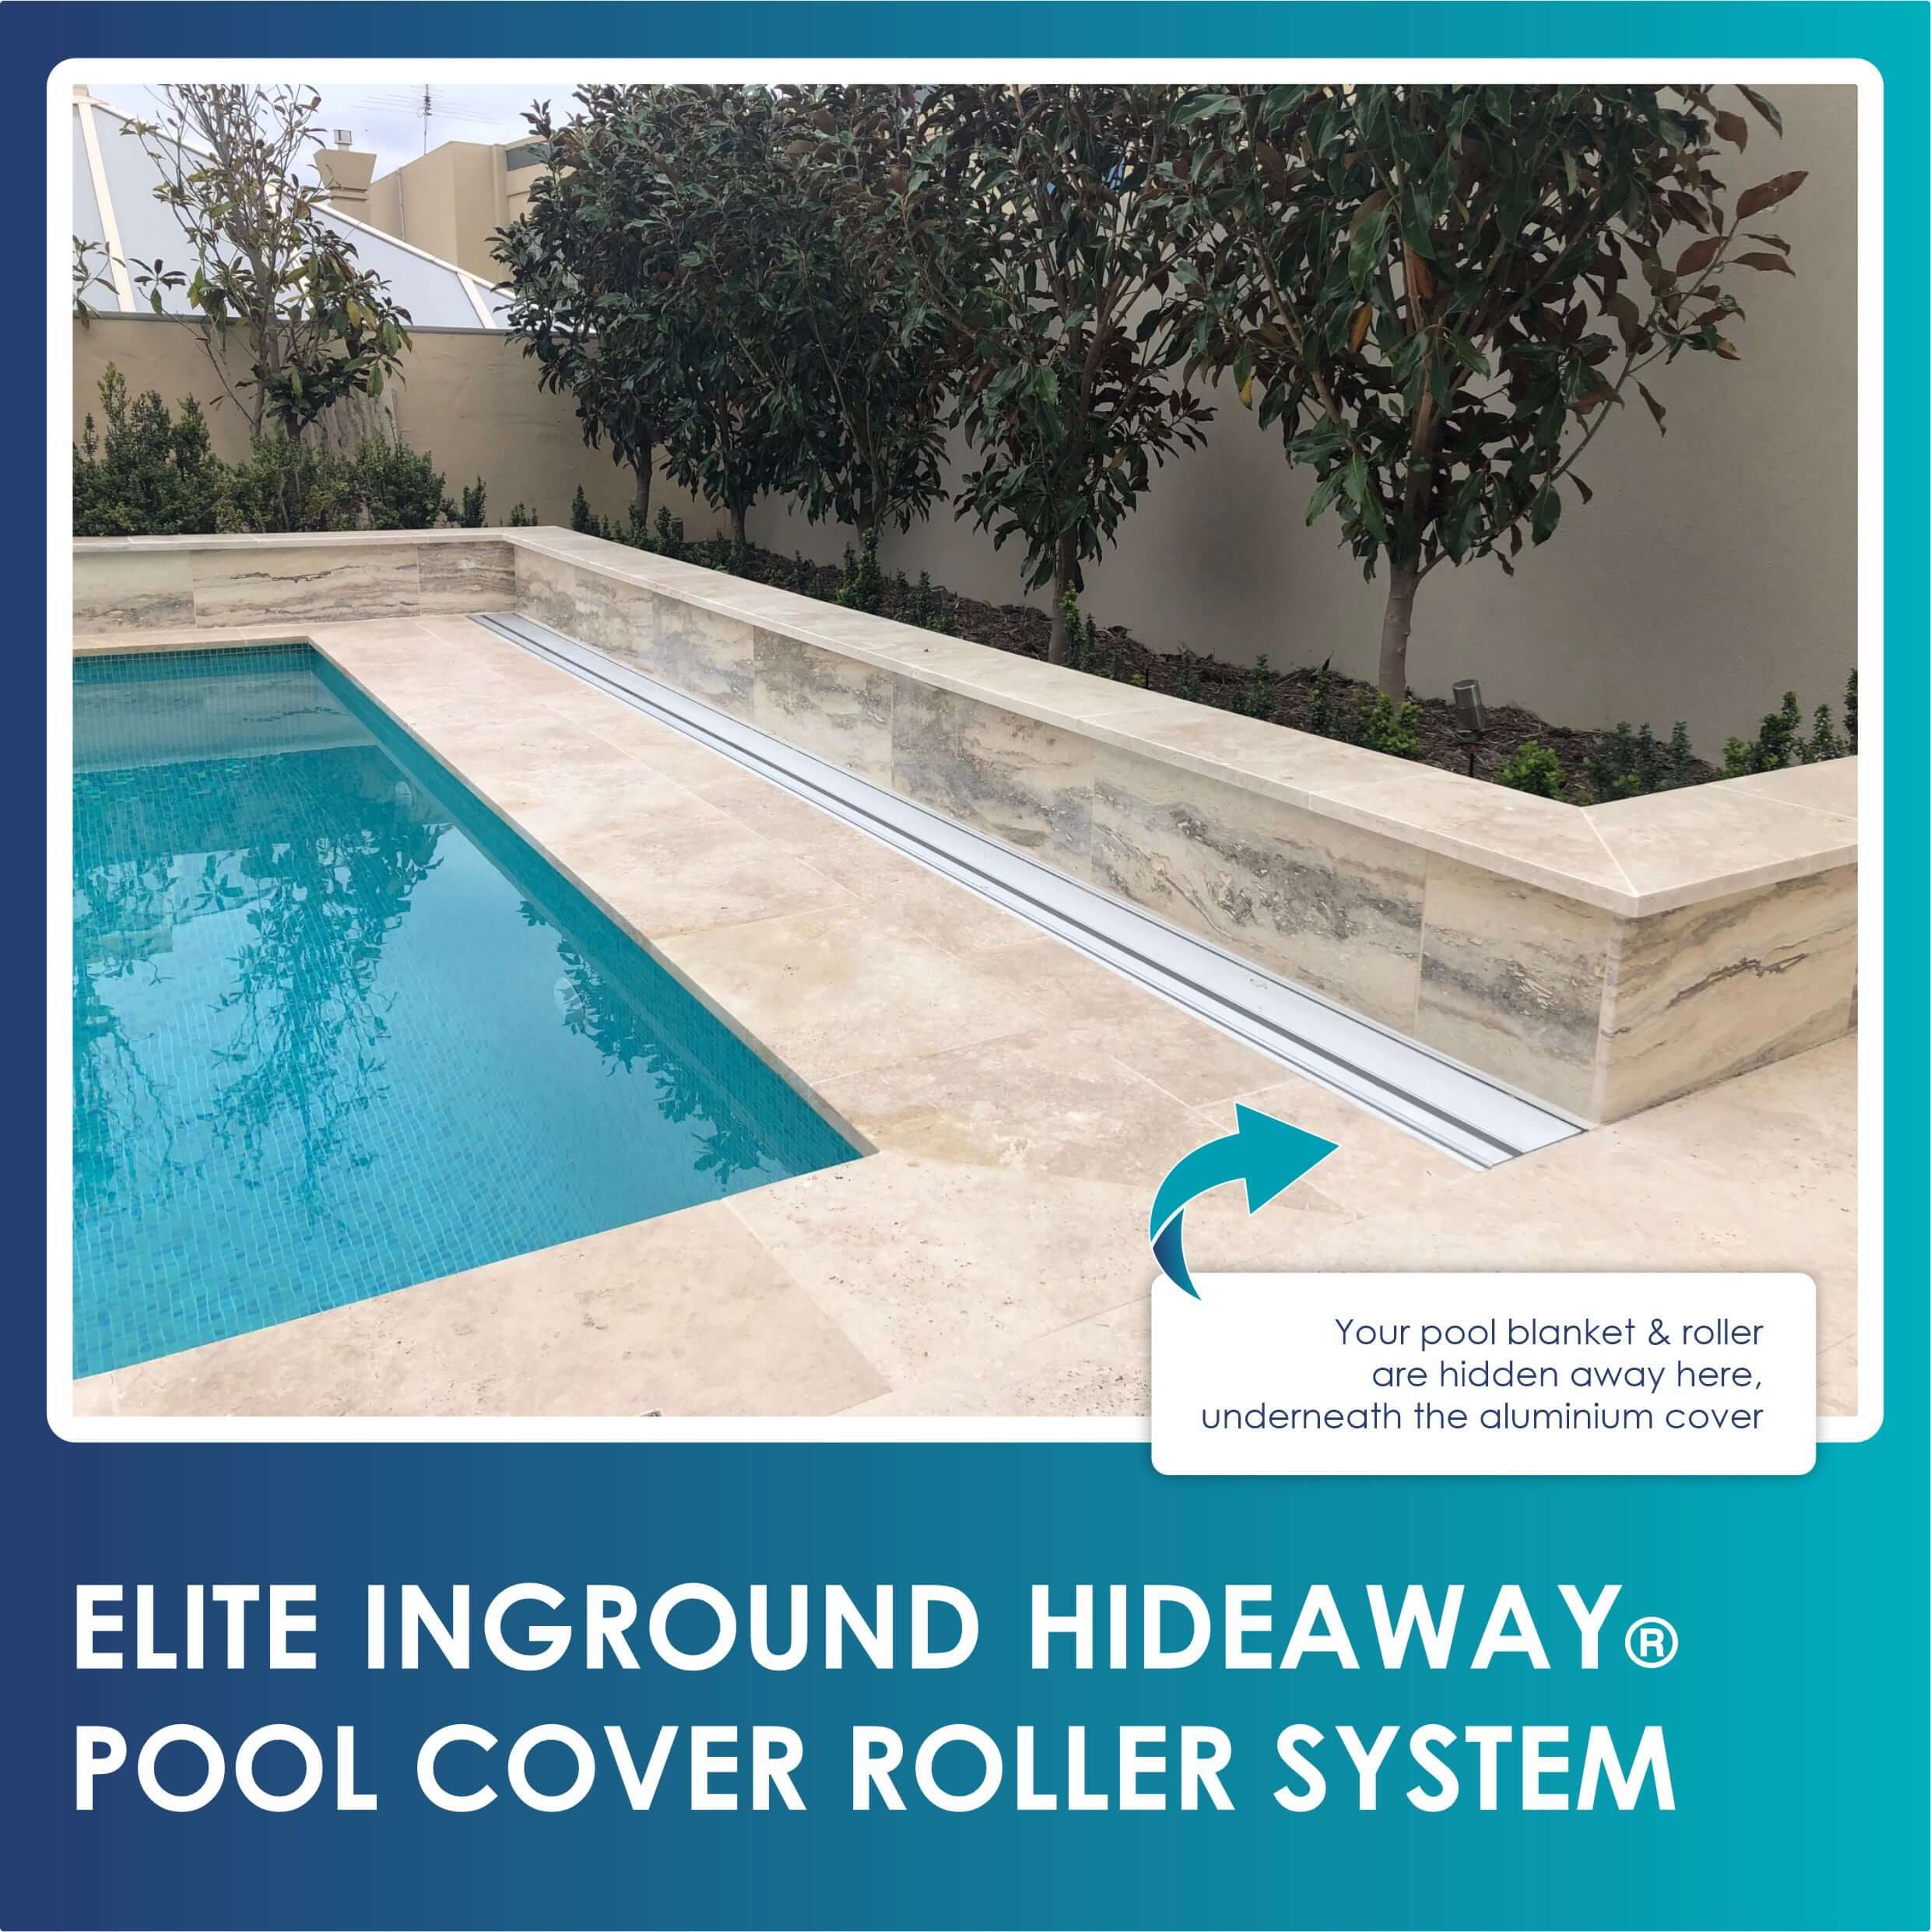 Inground pool cover hideaway system